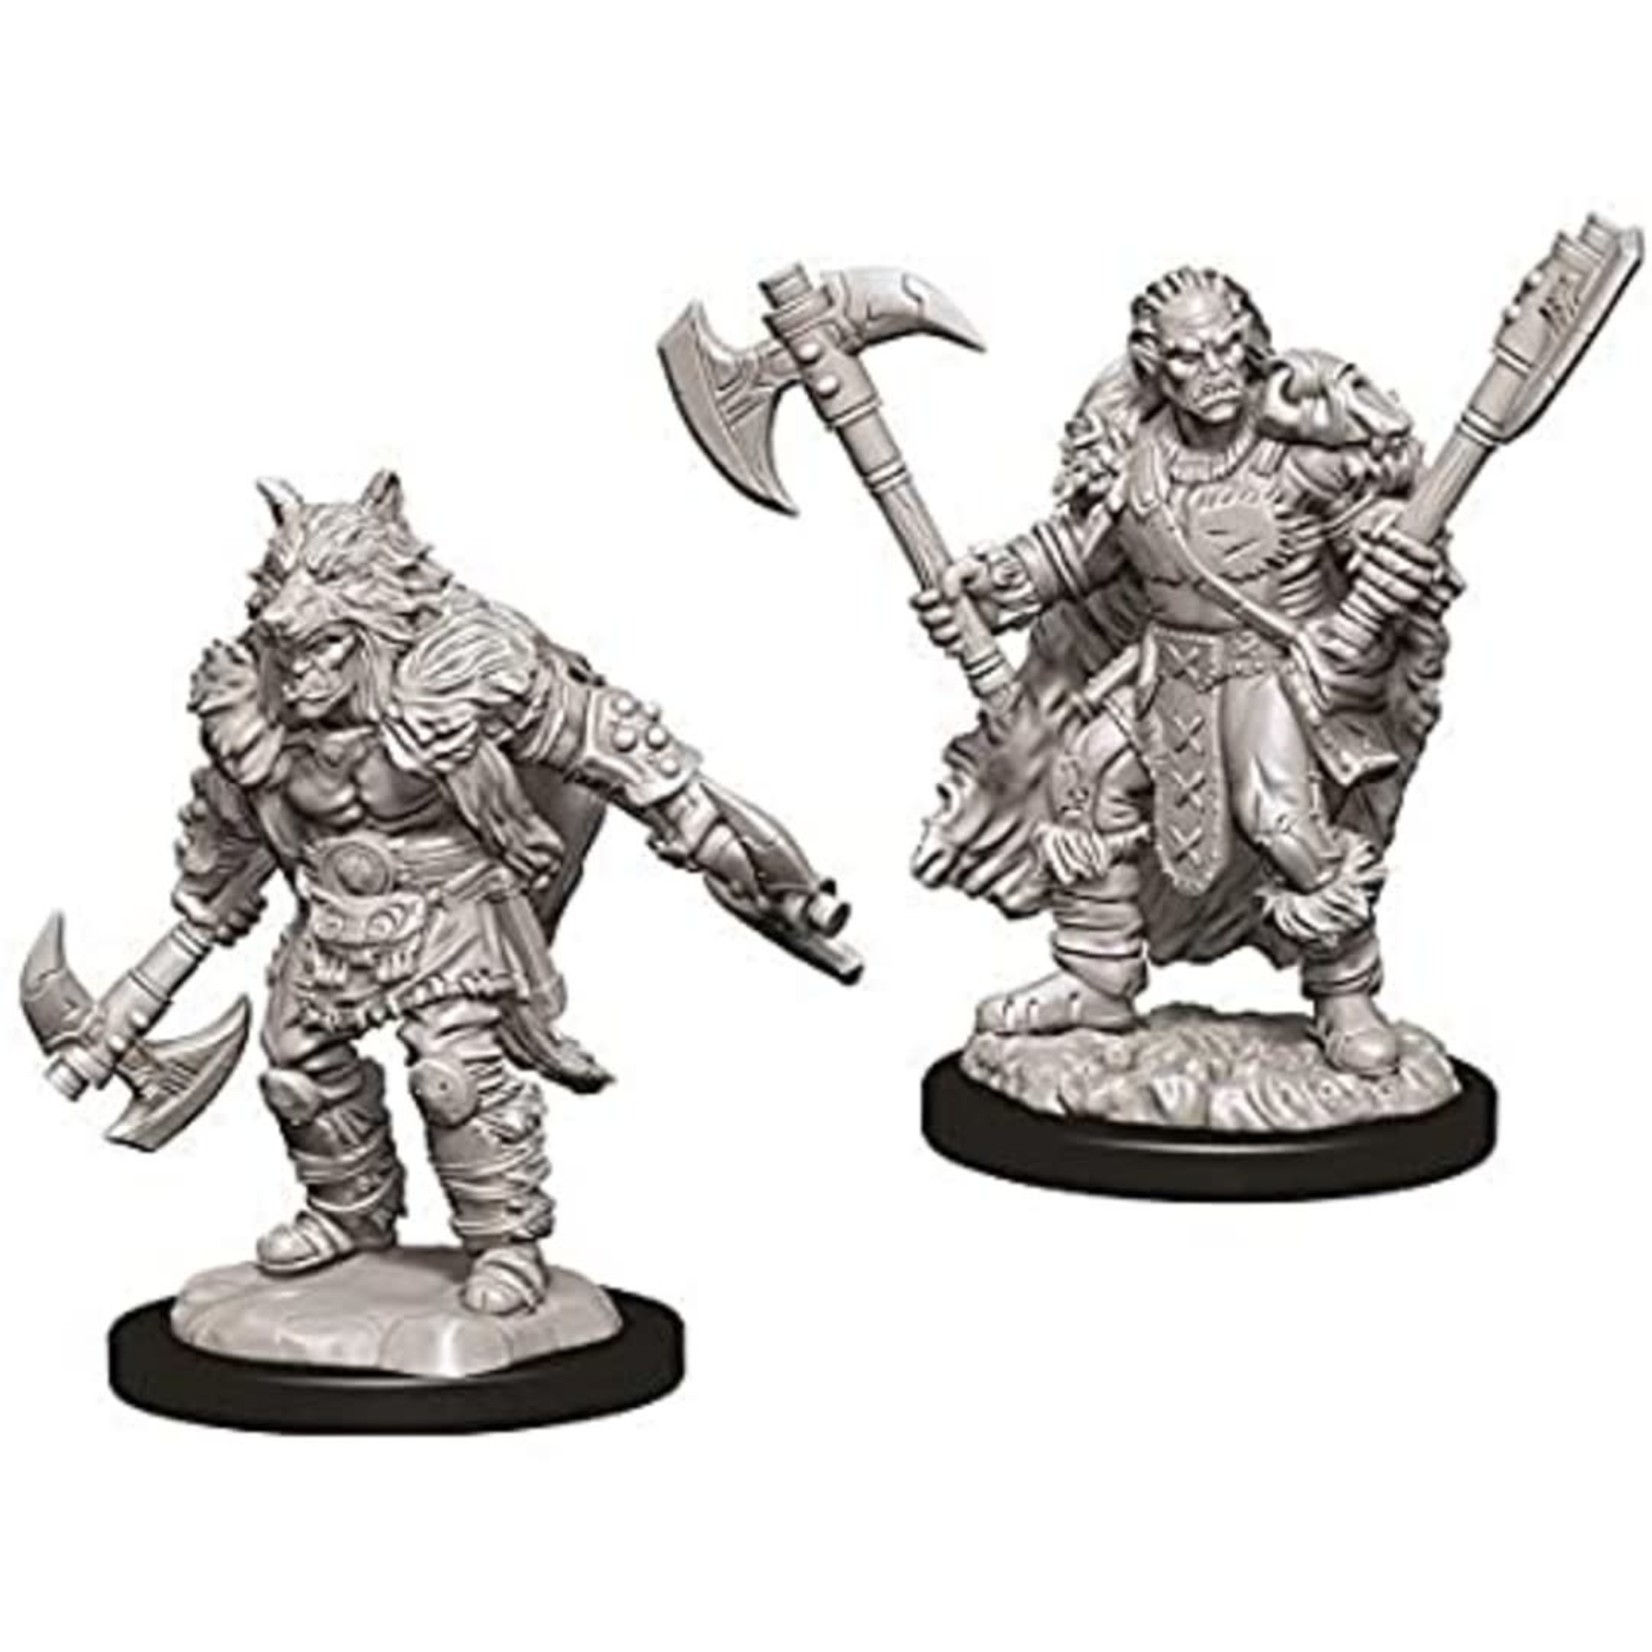 WizKids Dungeons and Dragons Nolzur's Marvelous Minis Male Half-Orc Barbarian